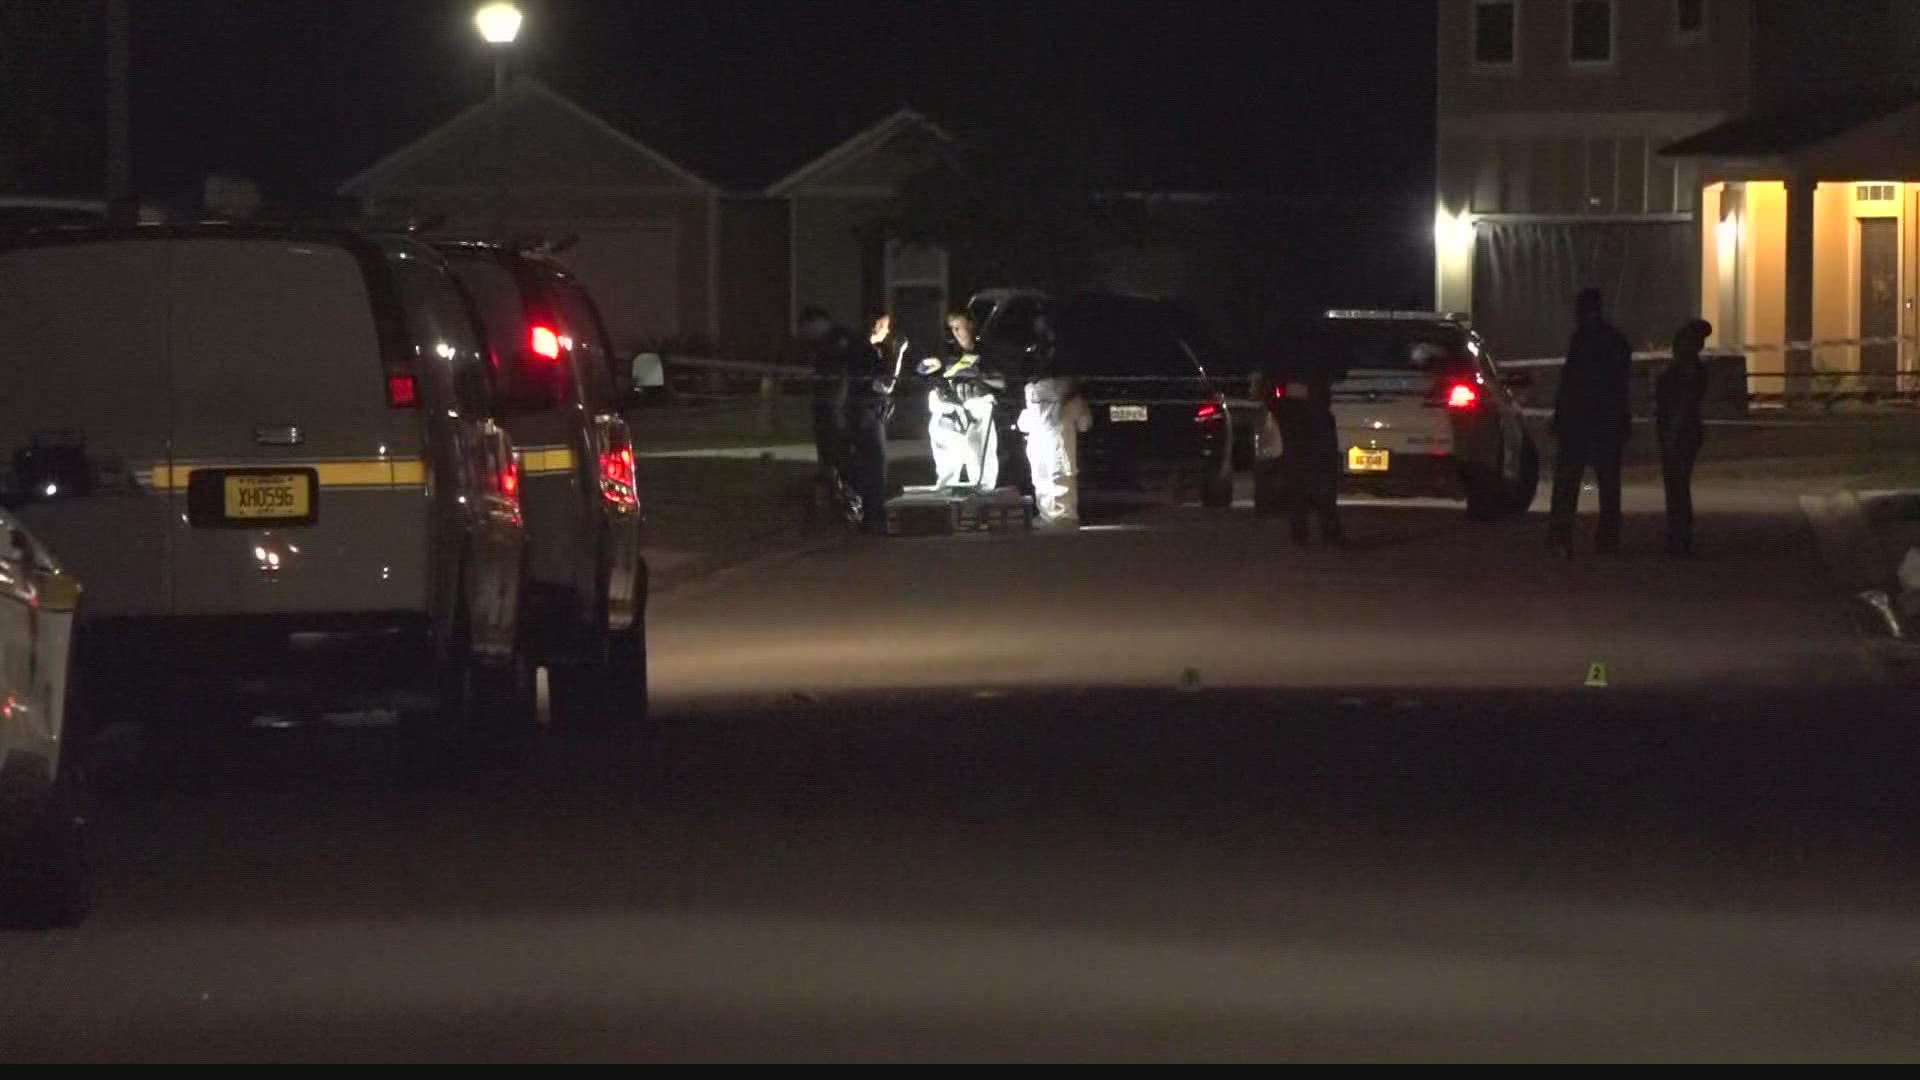 The Jacksonville Sheriff's Office is investigating after a man was shot to death inside a residence on Sandle Drive around 11:30 p.m.